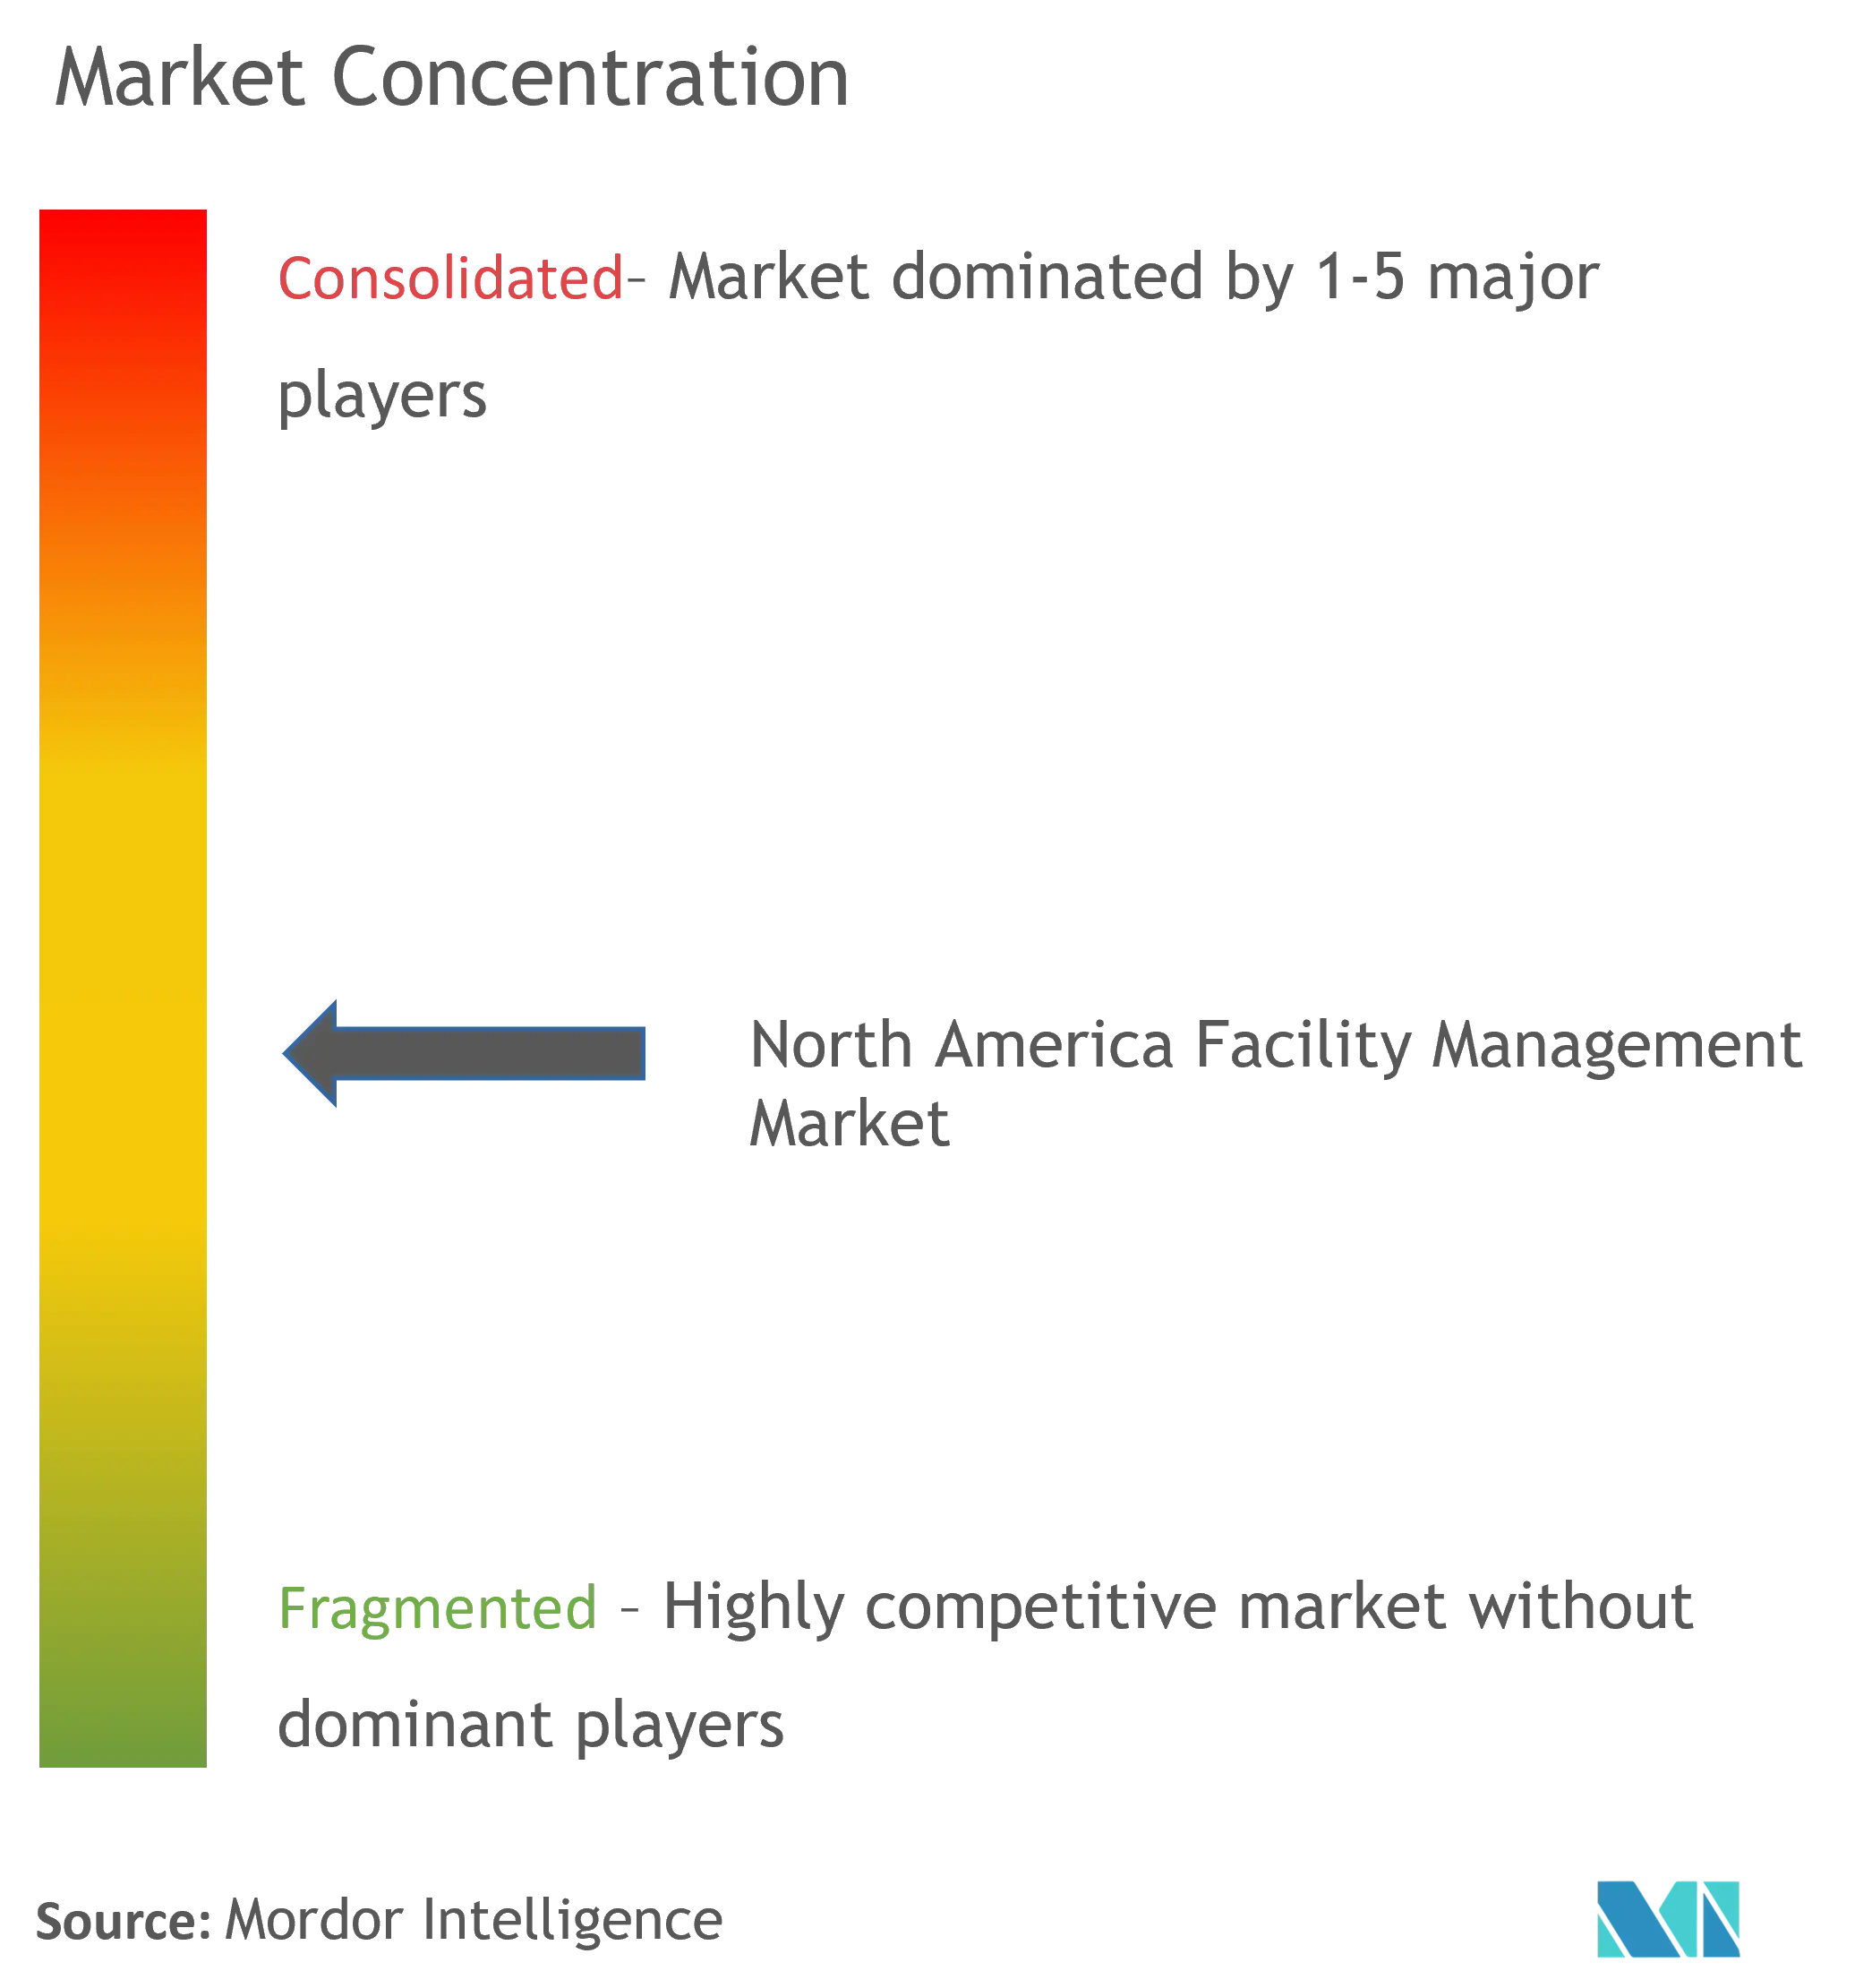 North America Facility Management Market Concentration